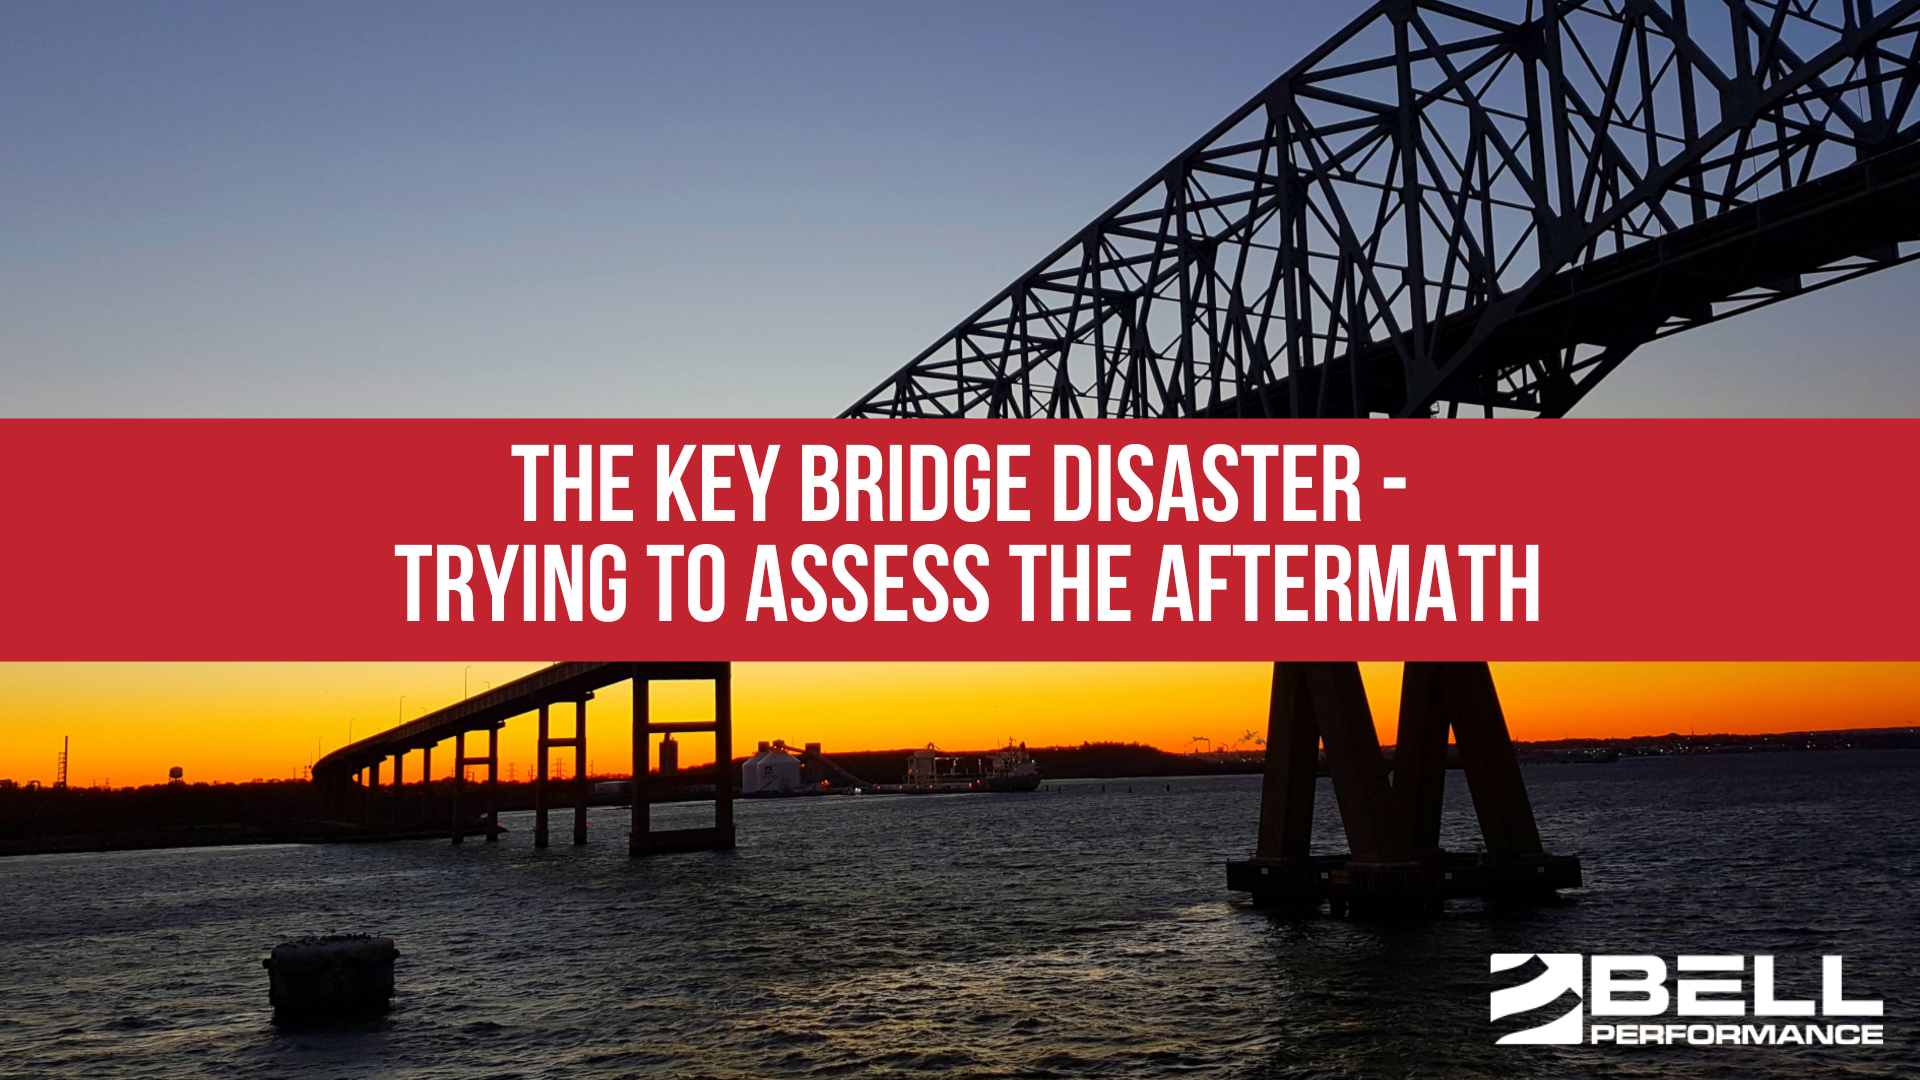 The Key Bridge Disaster - Trying to Assess the Aftermath